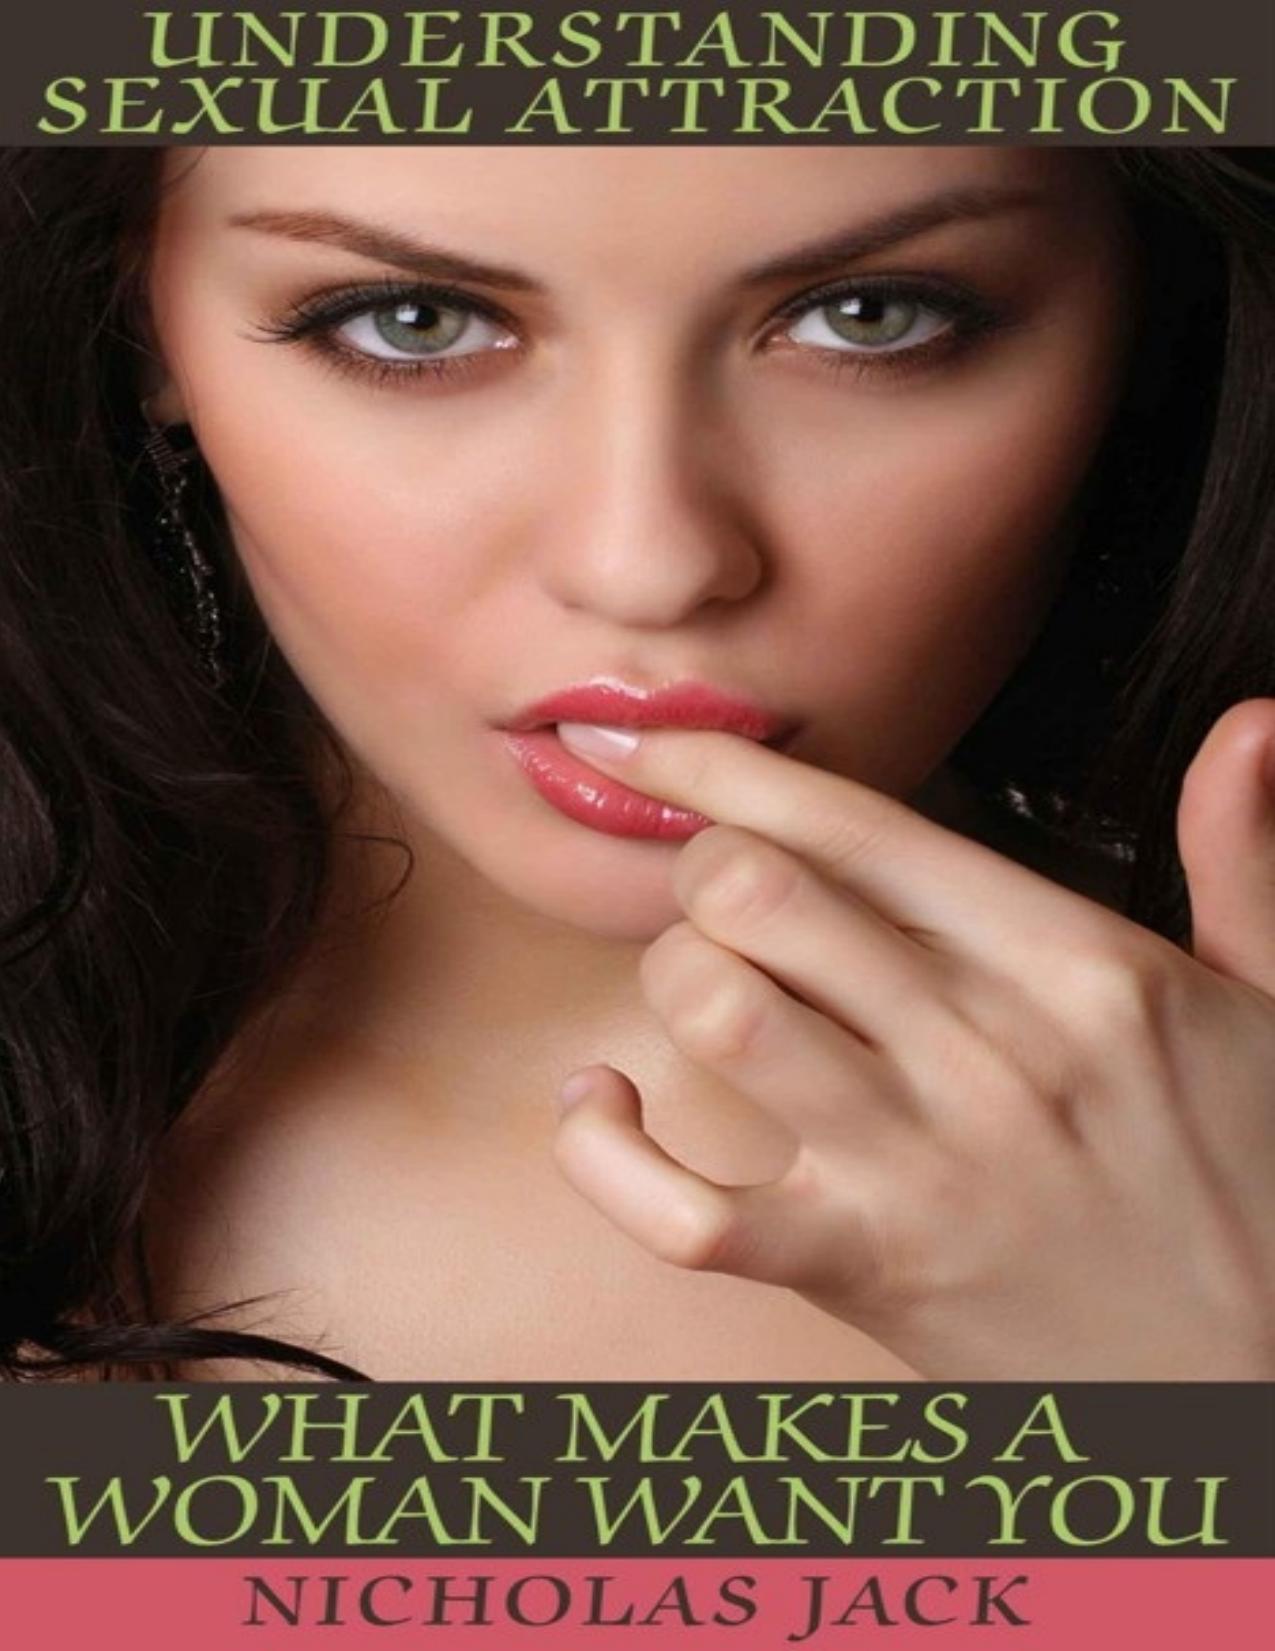 Understanding Sexual Attraction: What Makes a Woman Want You by Nicholas Jack